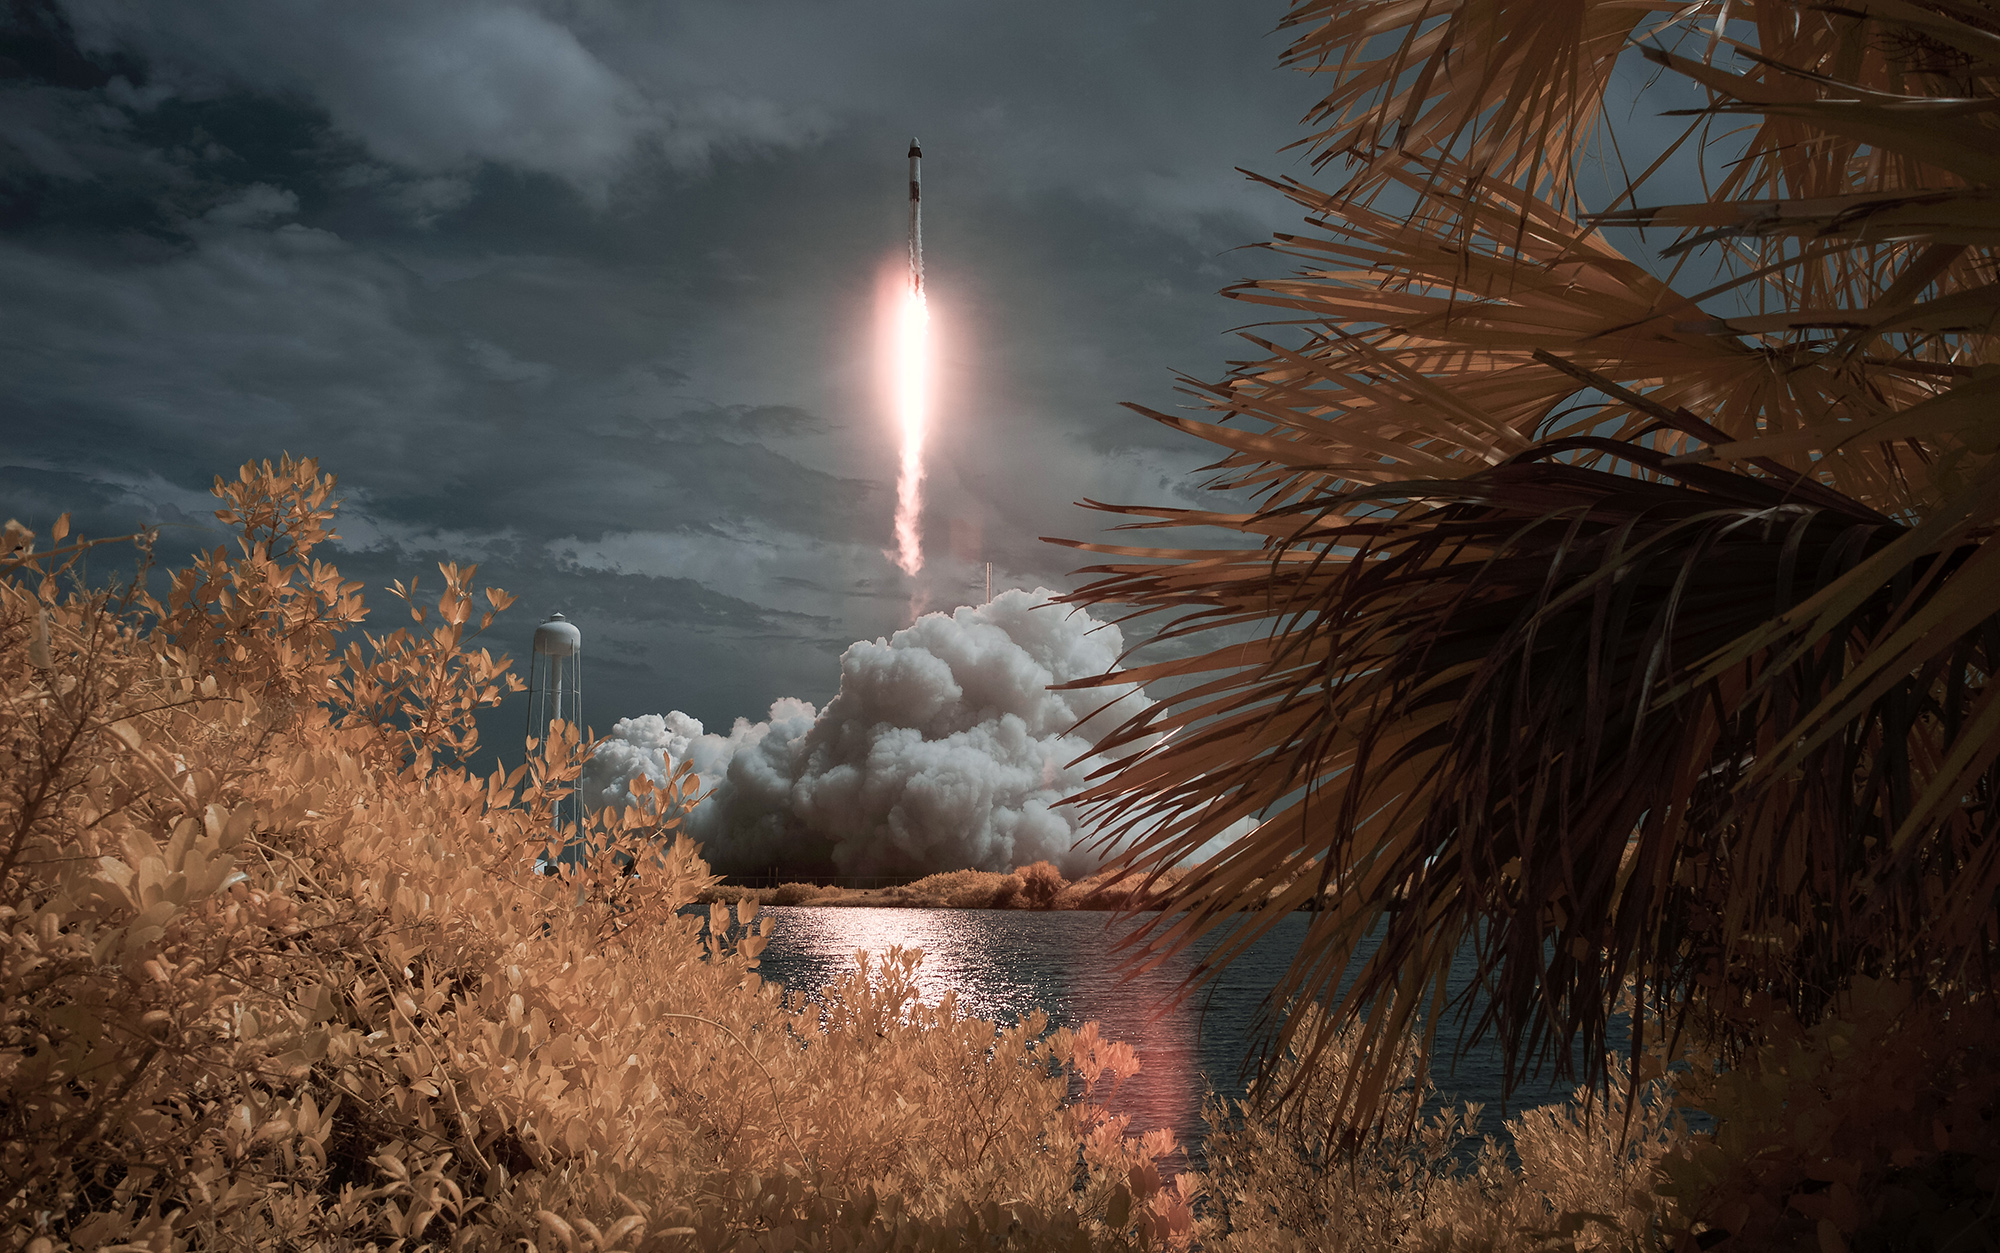 The SpaceX Falcon 9 as it launches from NASA’s Kennedy Space Center in Florida in this false color infrared exposure on May 30.